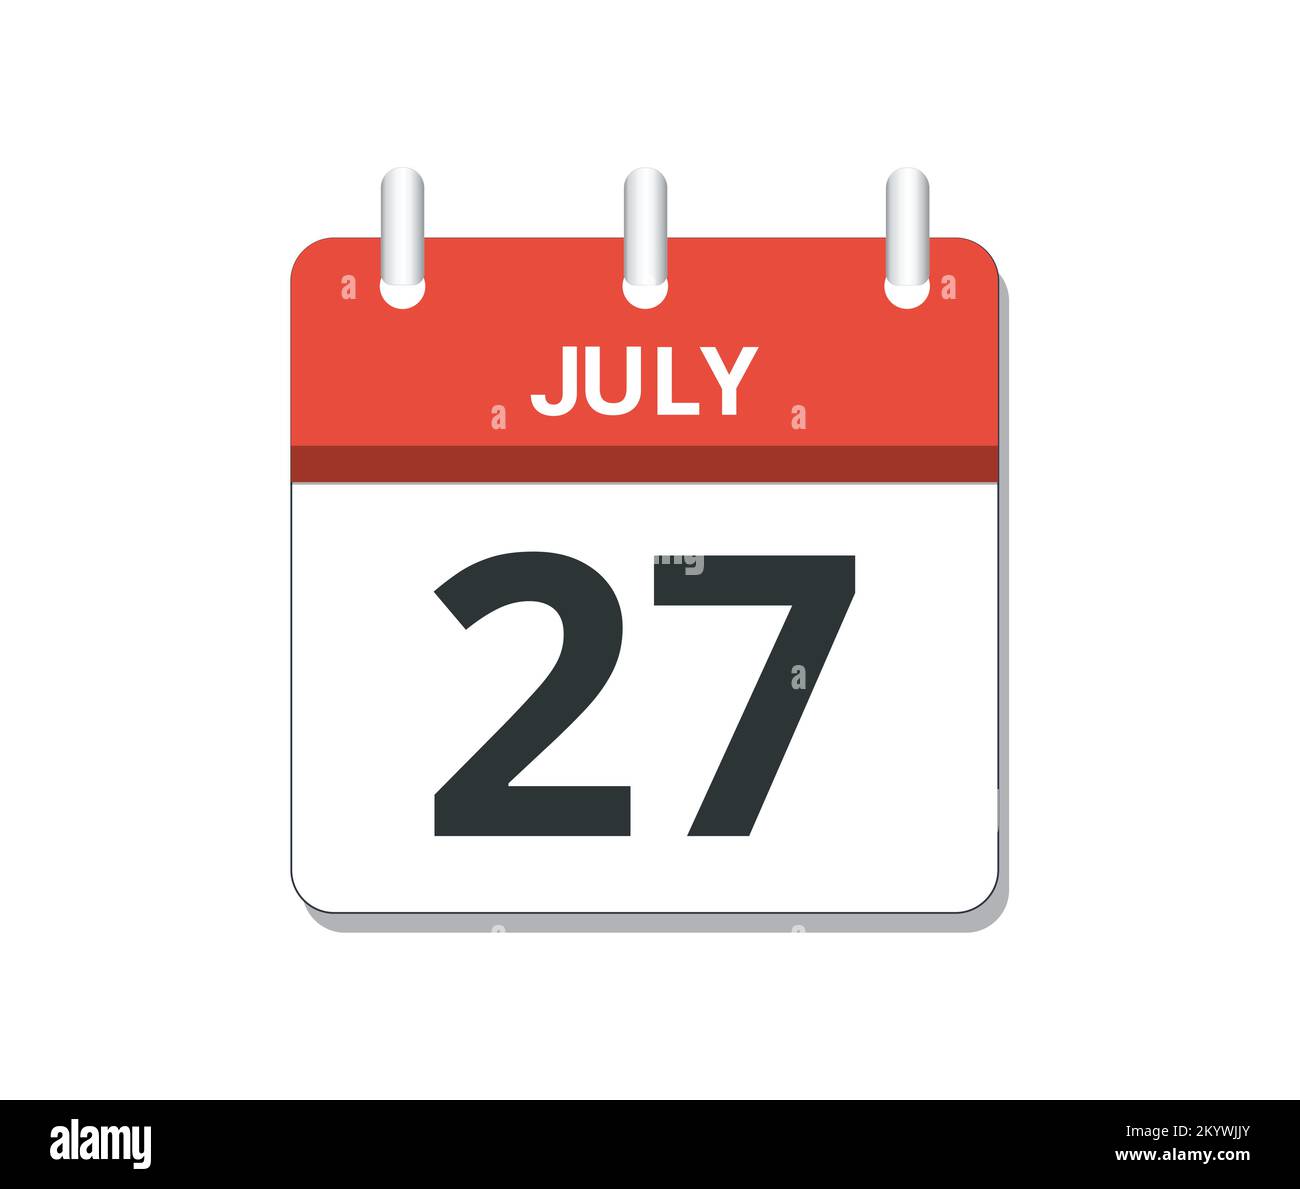 July 27th calendar icon vector. Concept of schedule, business and tasks Stock Vector